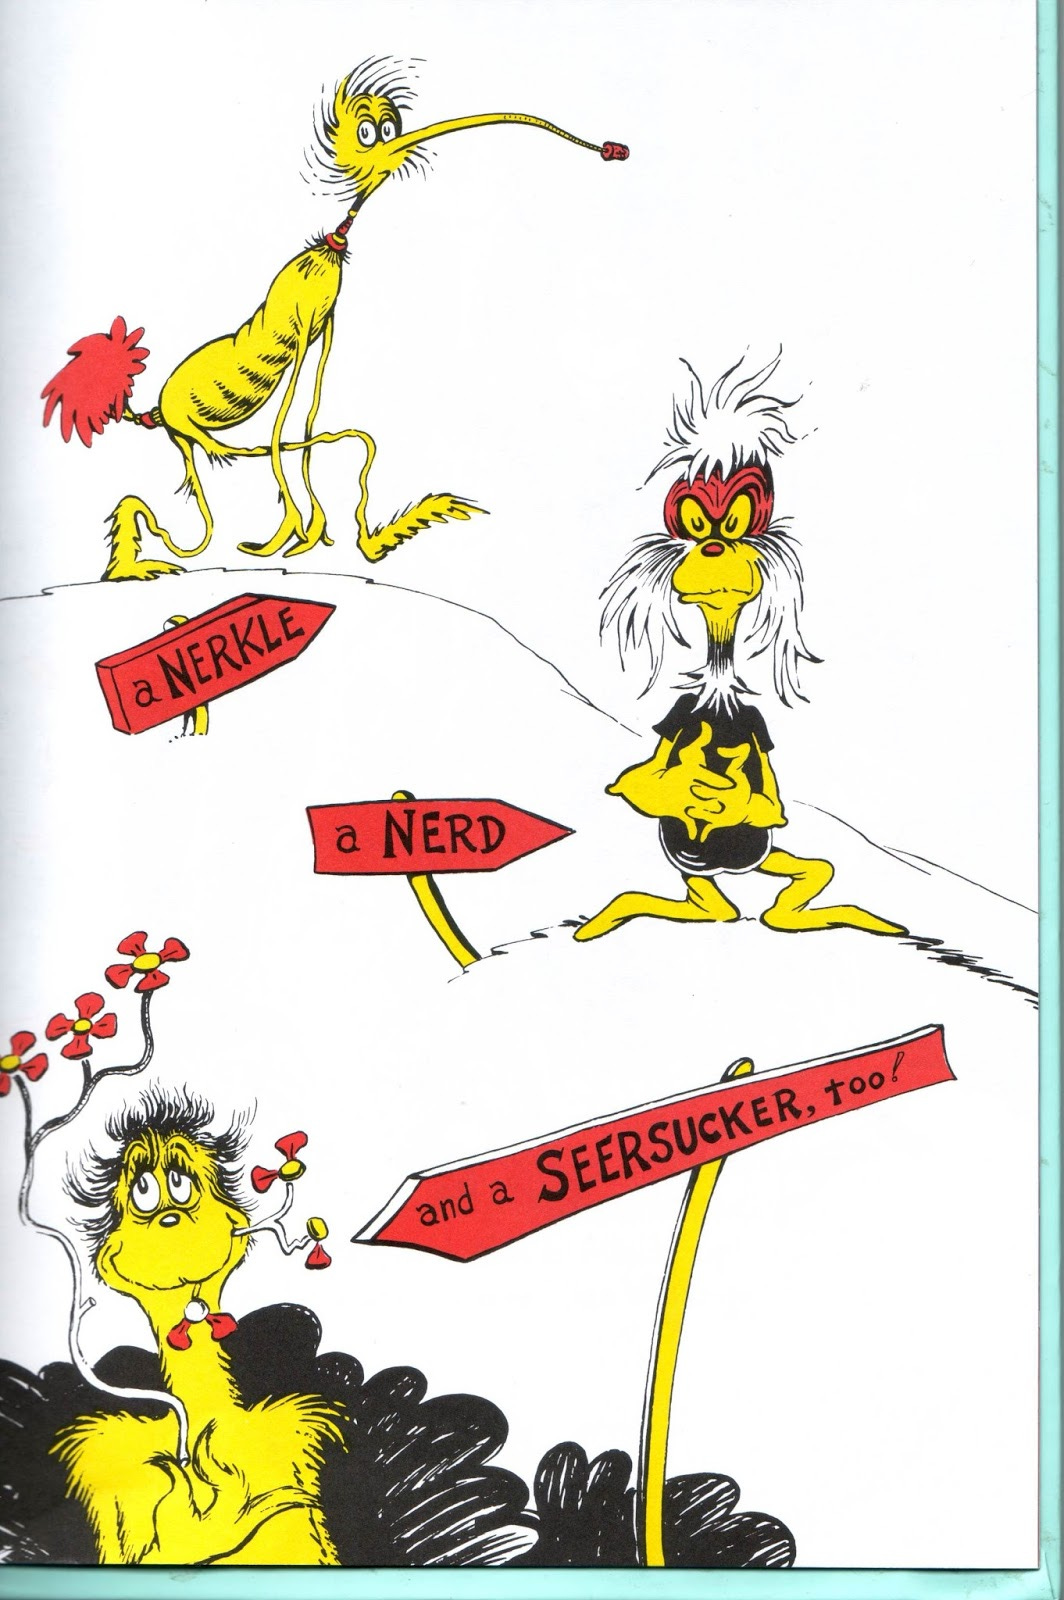 Read Aloud Dad : If I Ran the Zoo - A Mind Blowing, Nerdy Dr. Seuss Classic